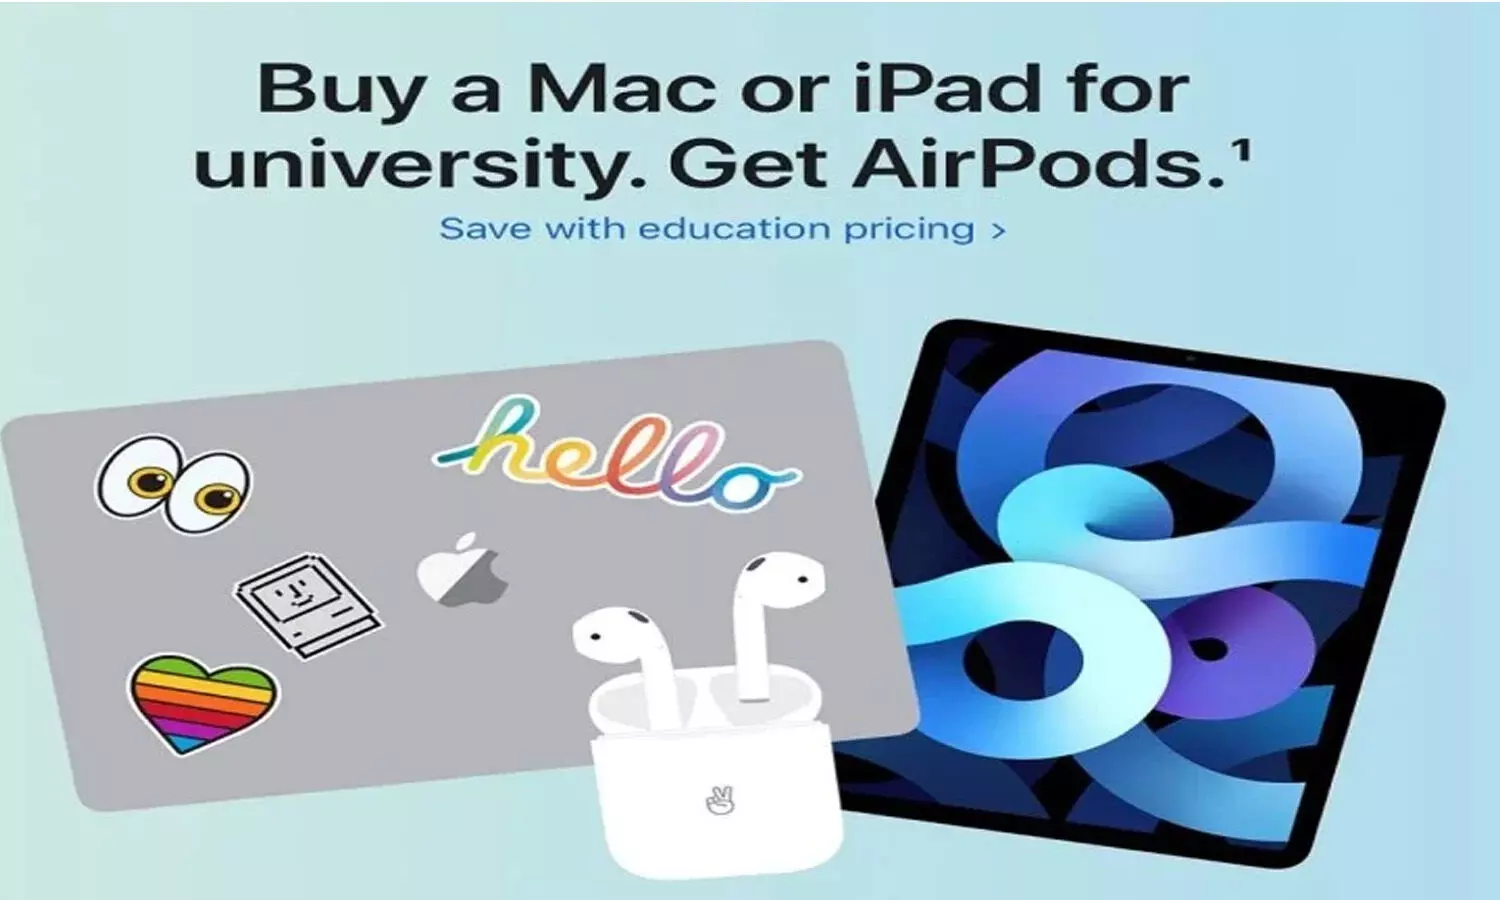 Apple Education Offer: AirPods worth Rs 14 thousand are available for free on buying Mac and iPad